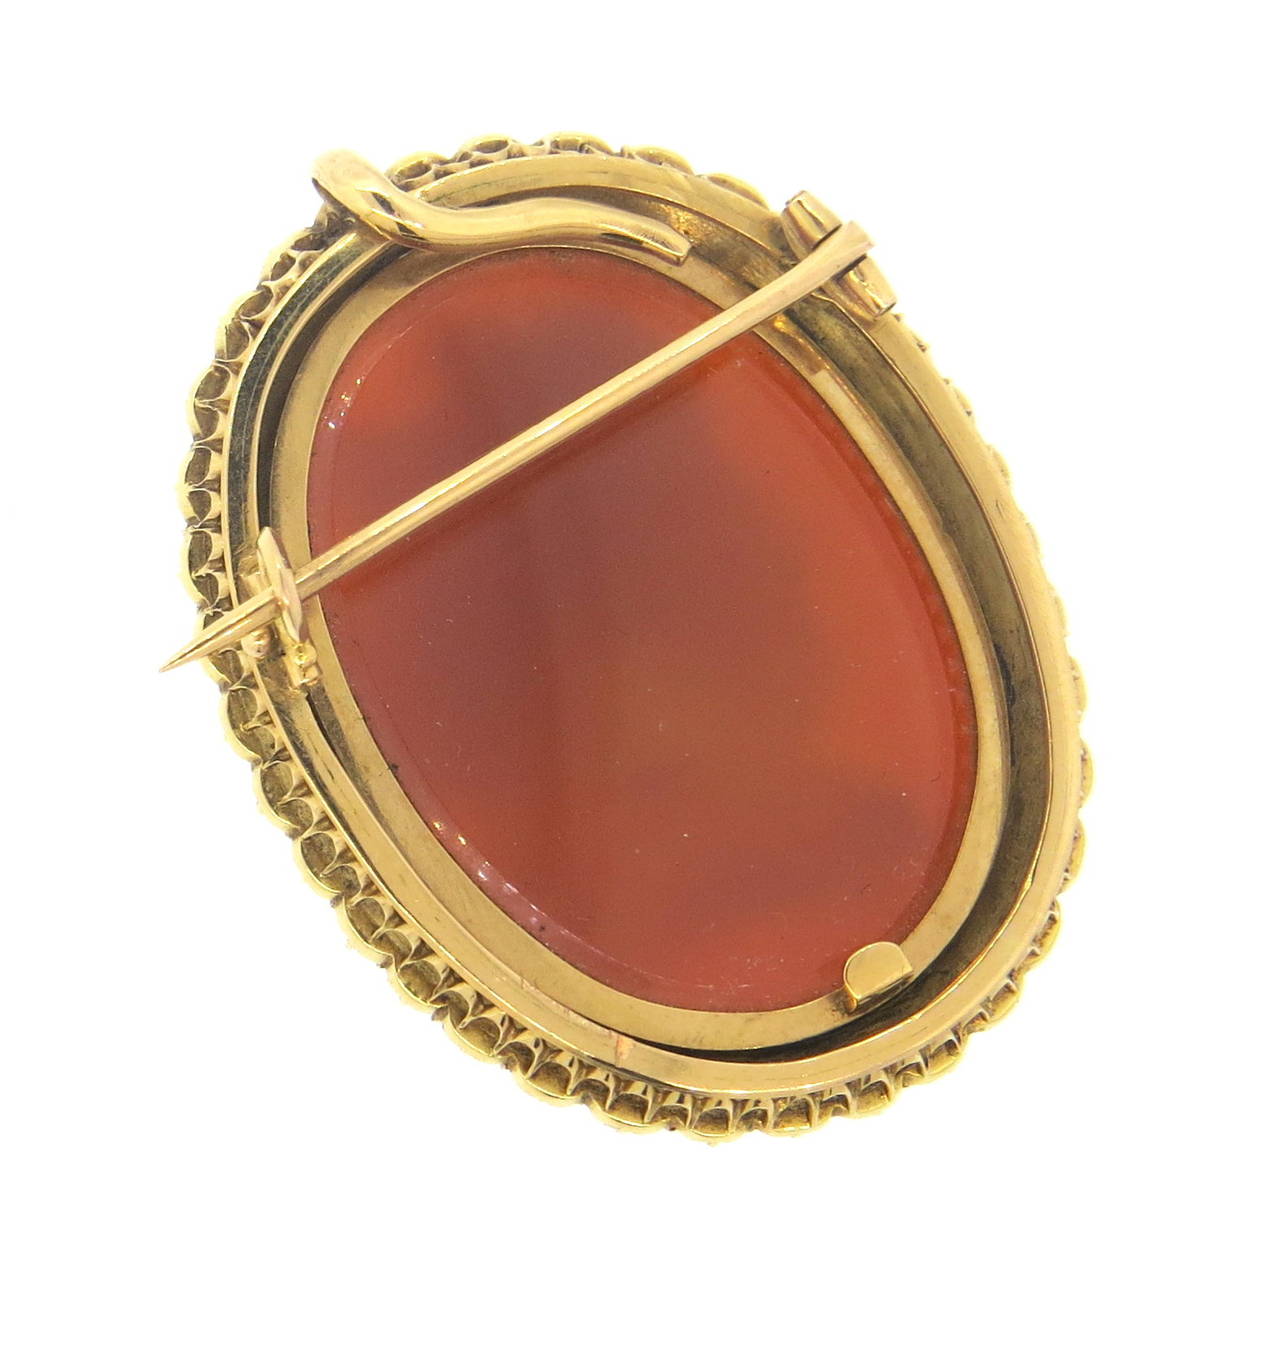 An 18k rose gold hard stone cameo surrounded by natural pearls 3.2mm in diameter.  This antique piece measures 50mm x 37mm and weighs 30.6 grams.  This can be worn as a brooch or the hardware in back can be removed for use as a pendant.